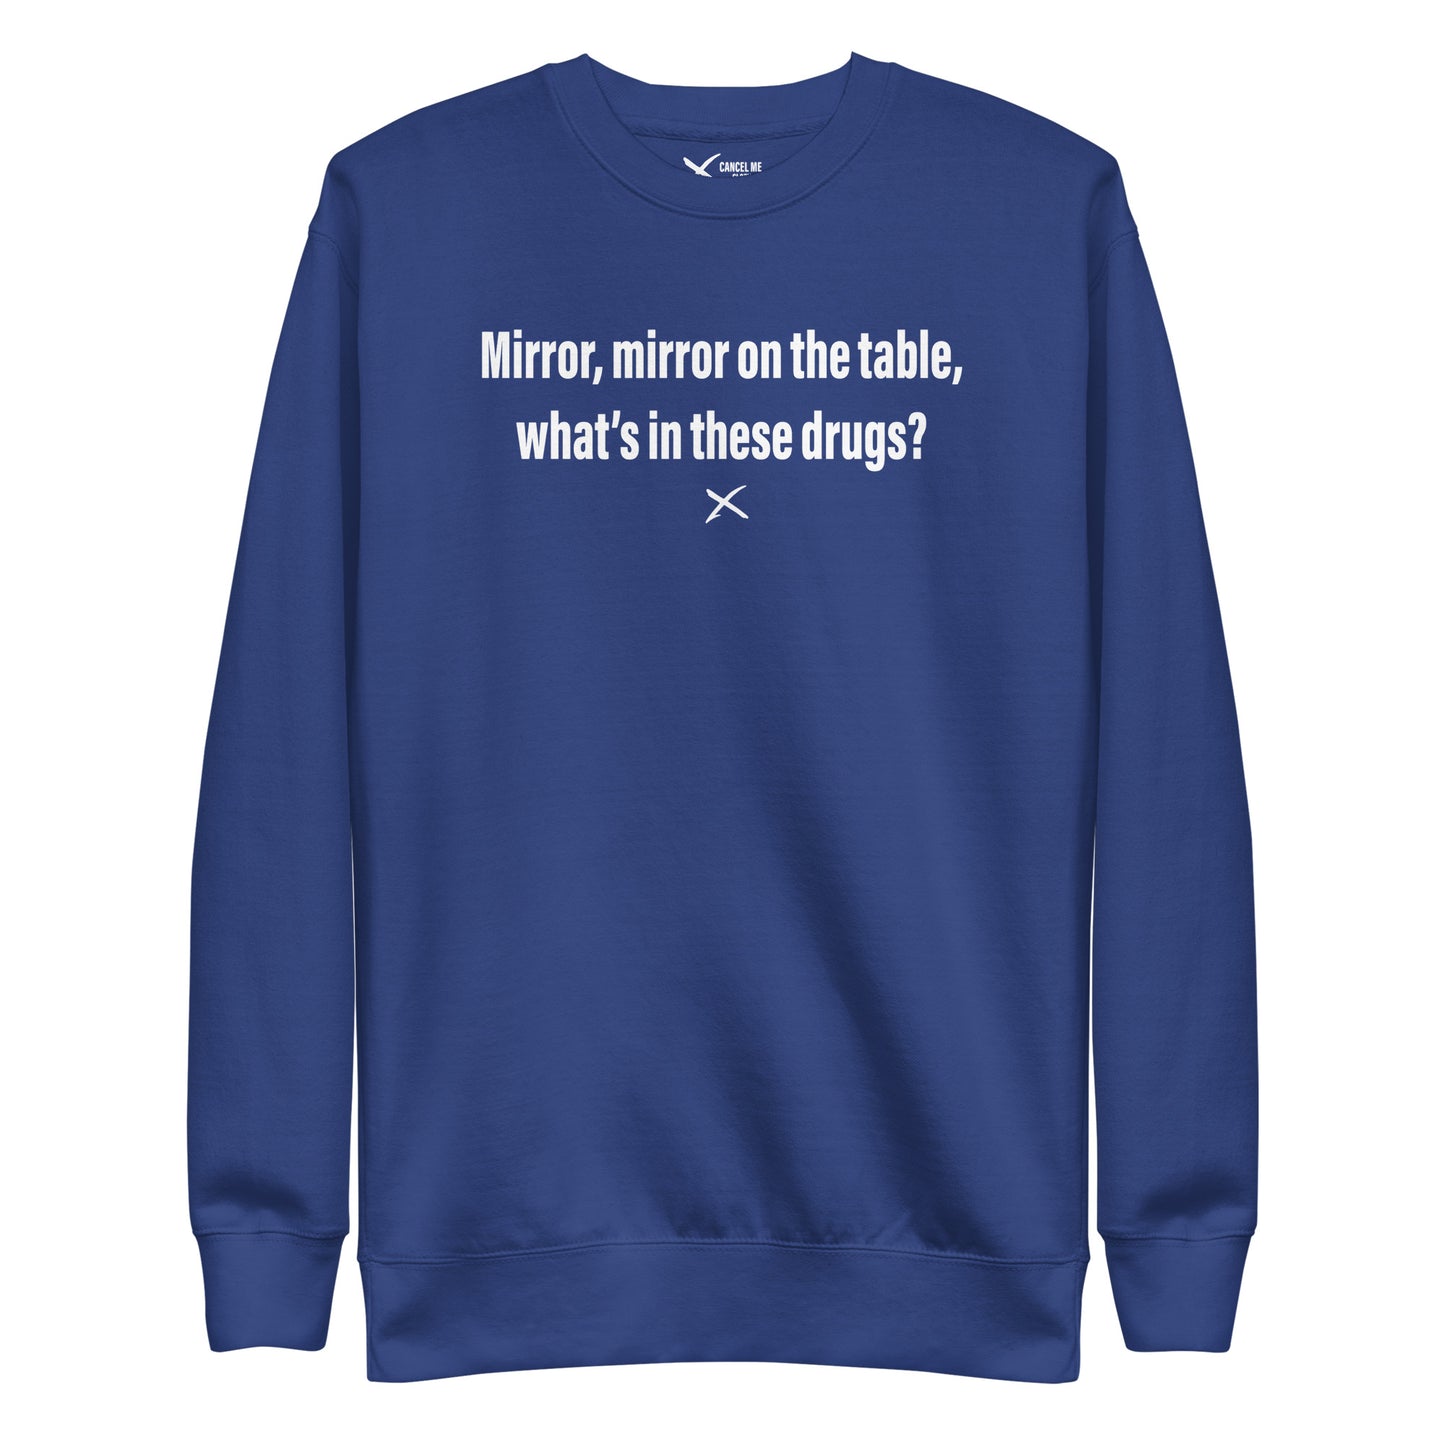 Mirror, mirror on the table, what's in these drugs? - Sweatshirt